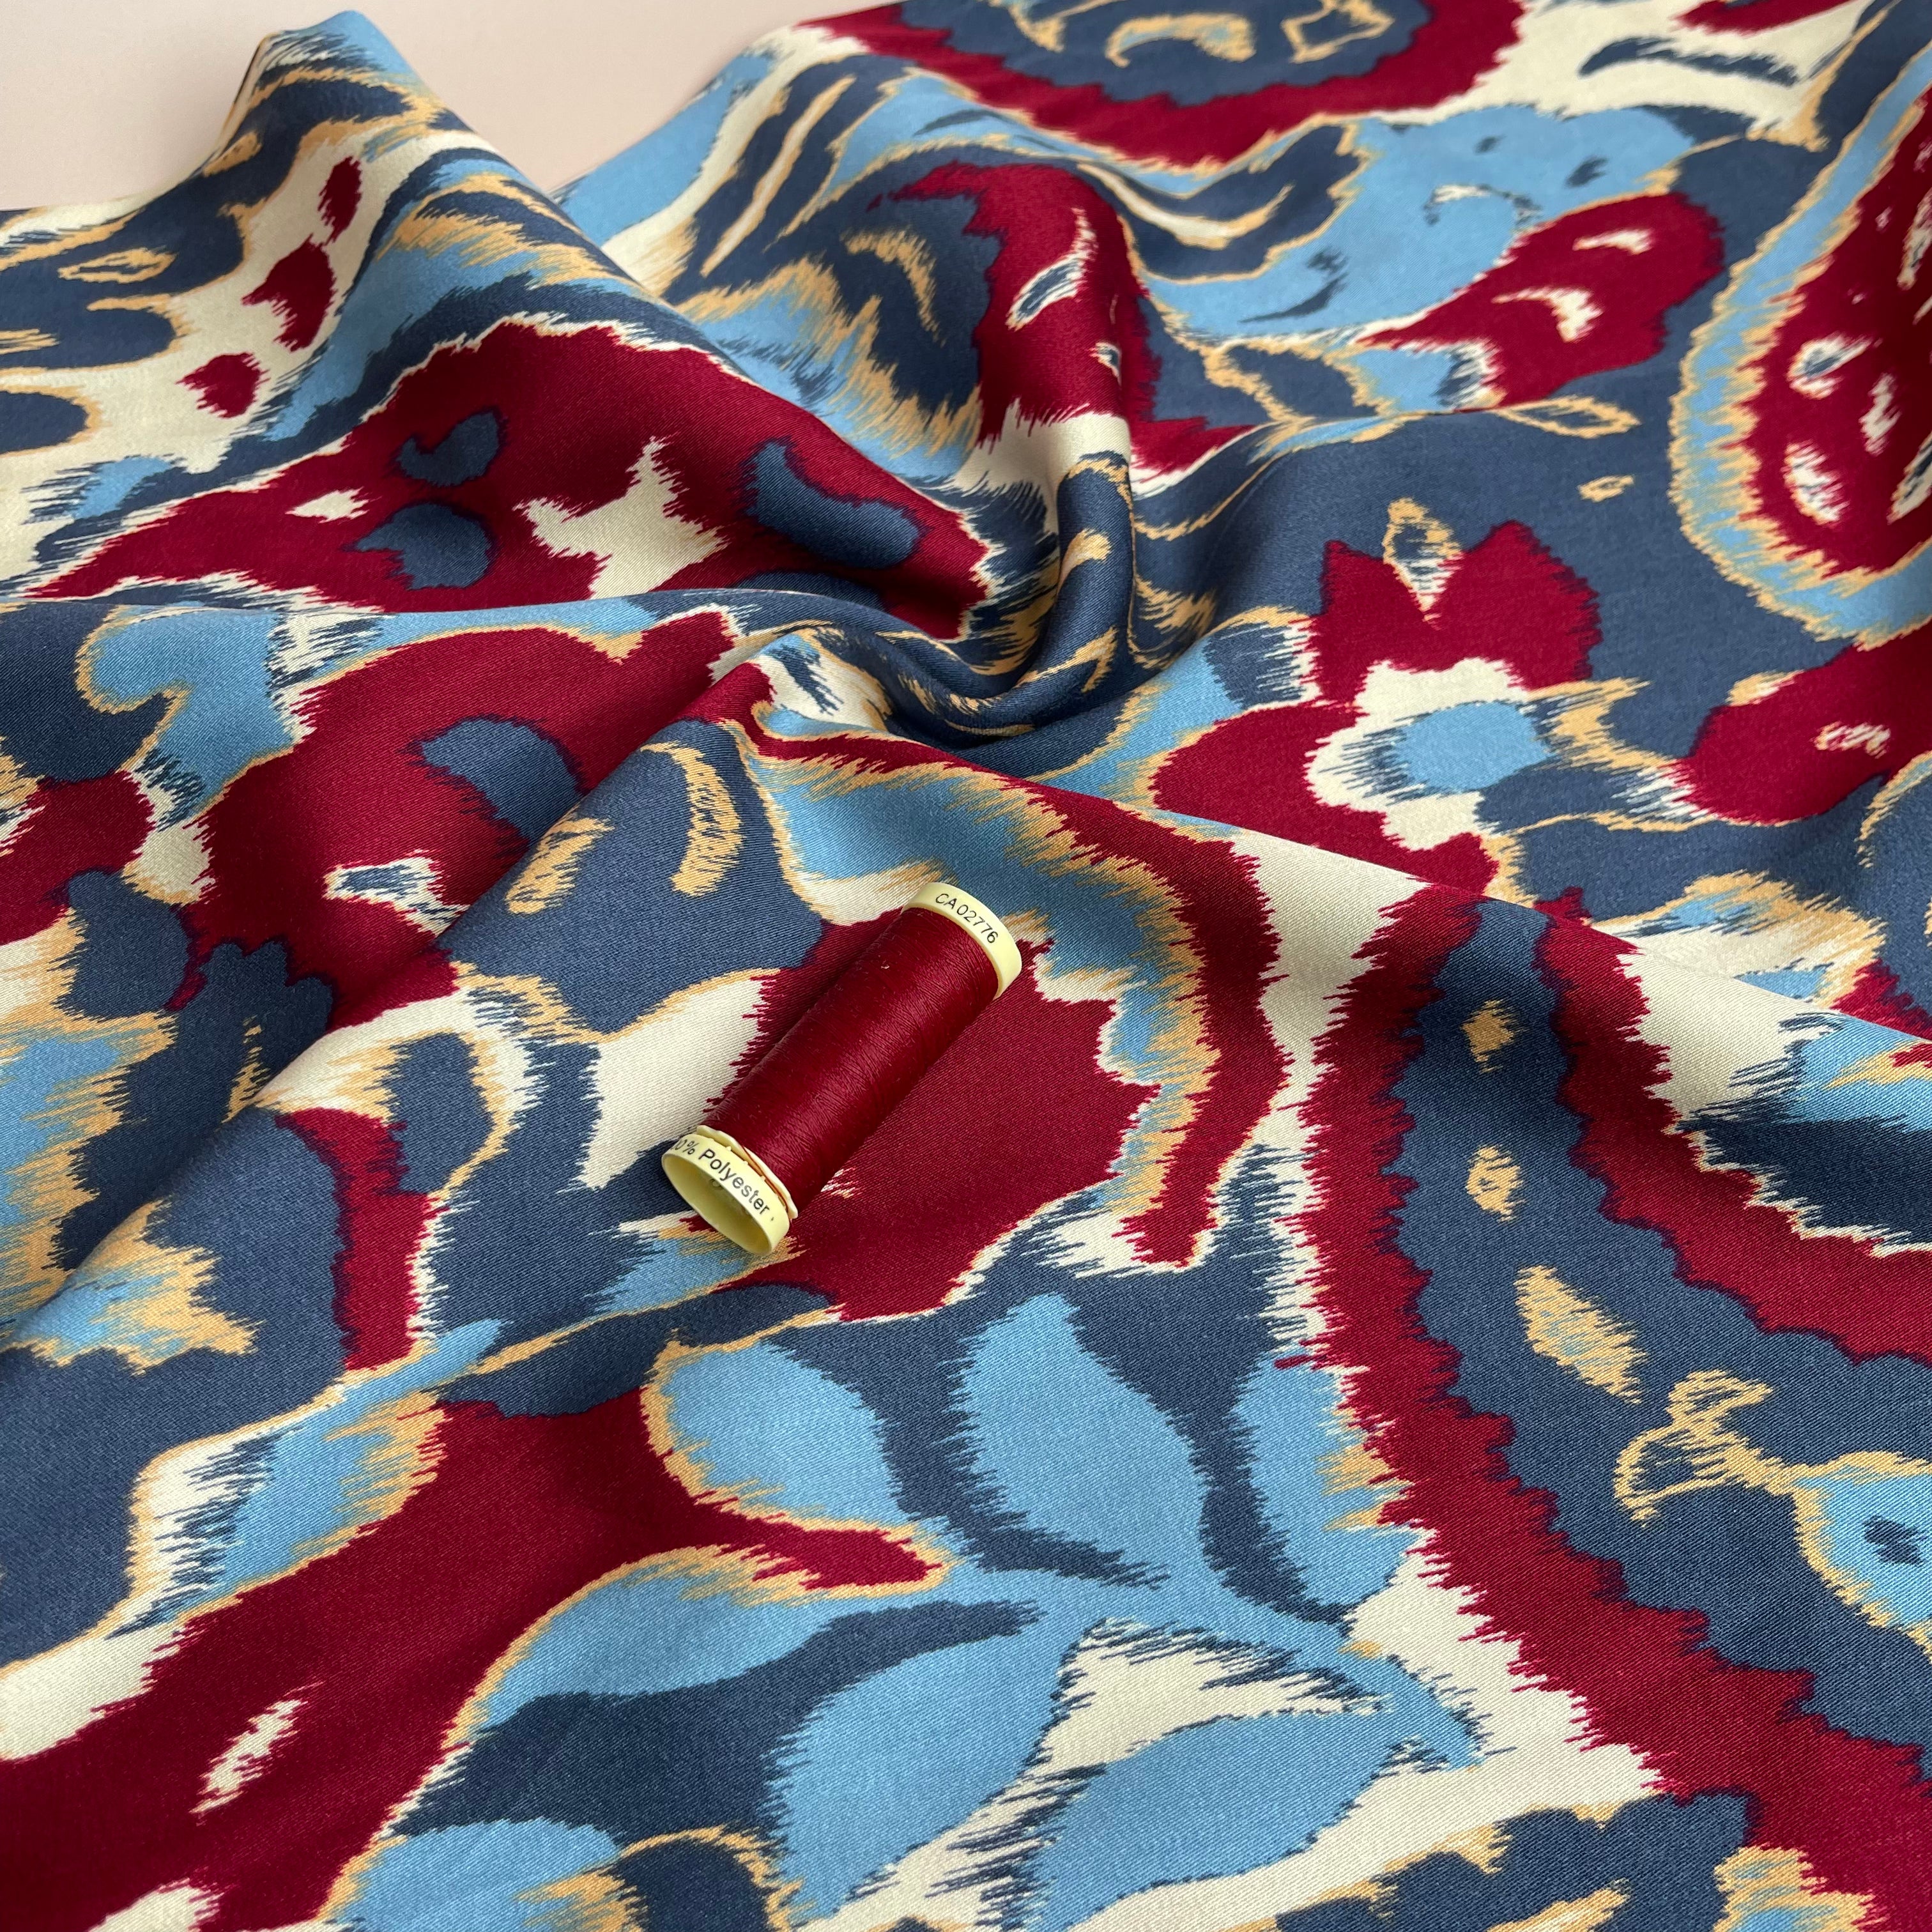 REMNANT 2.45 Metres - Hazy Paisley Blue and Red Viscose Sateen Fabric